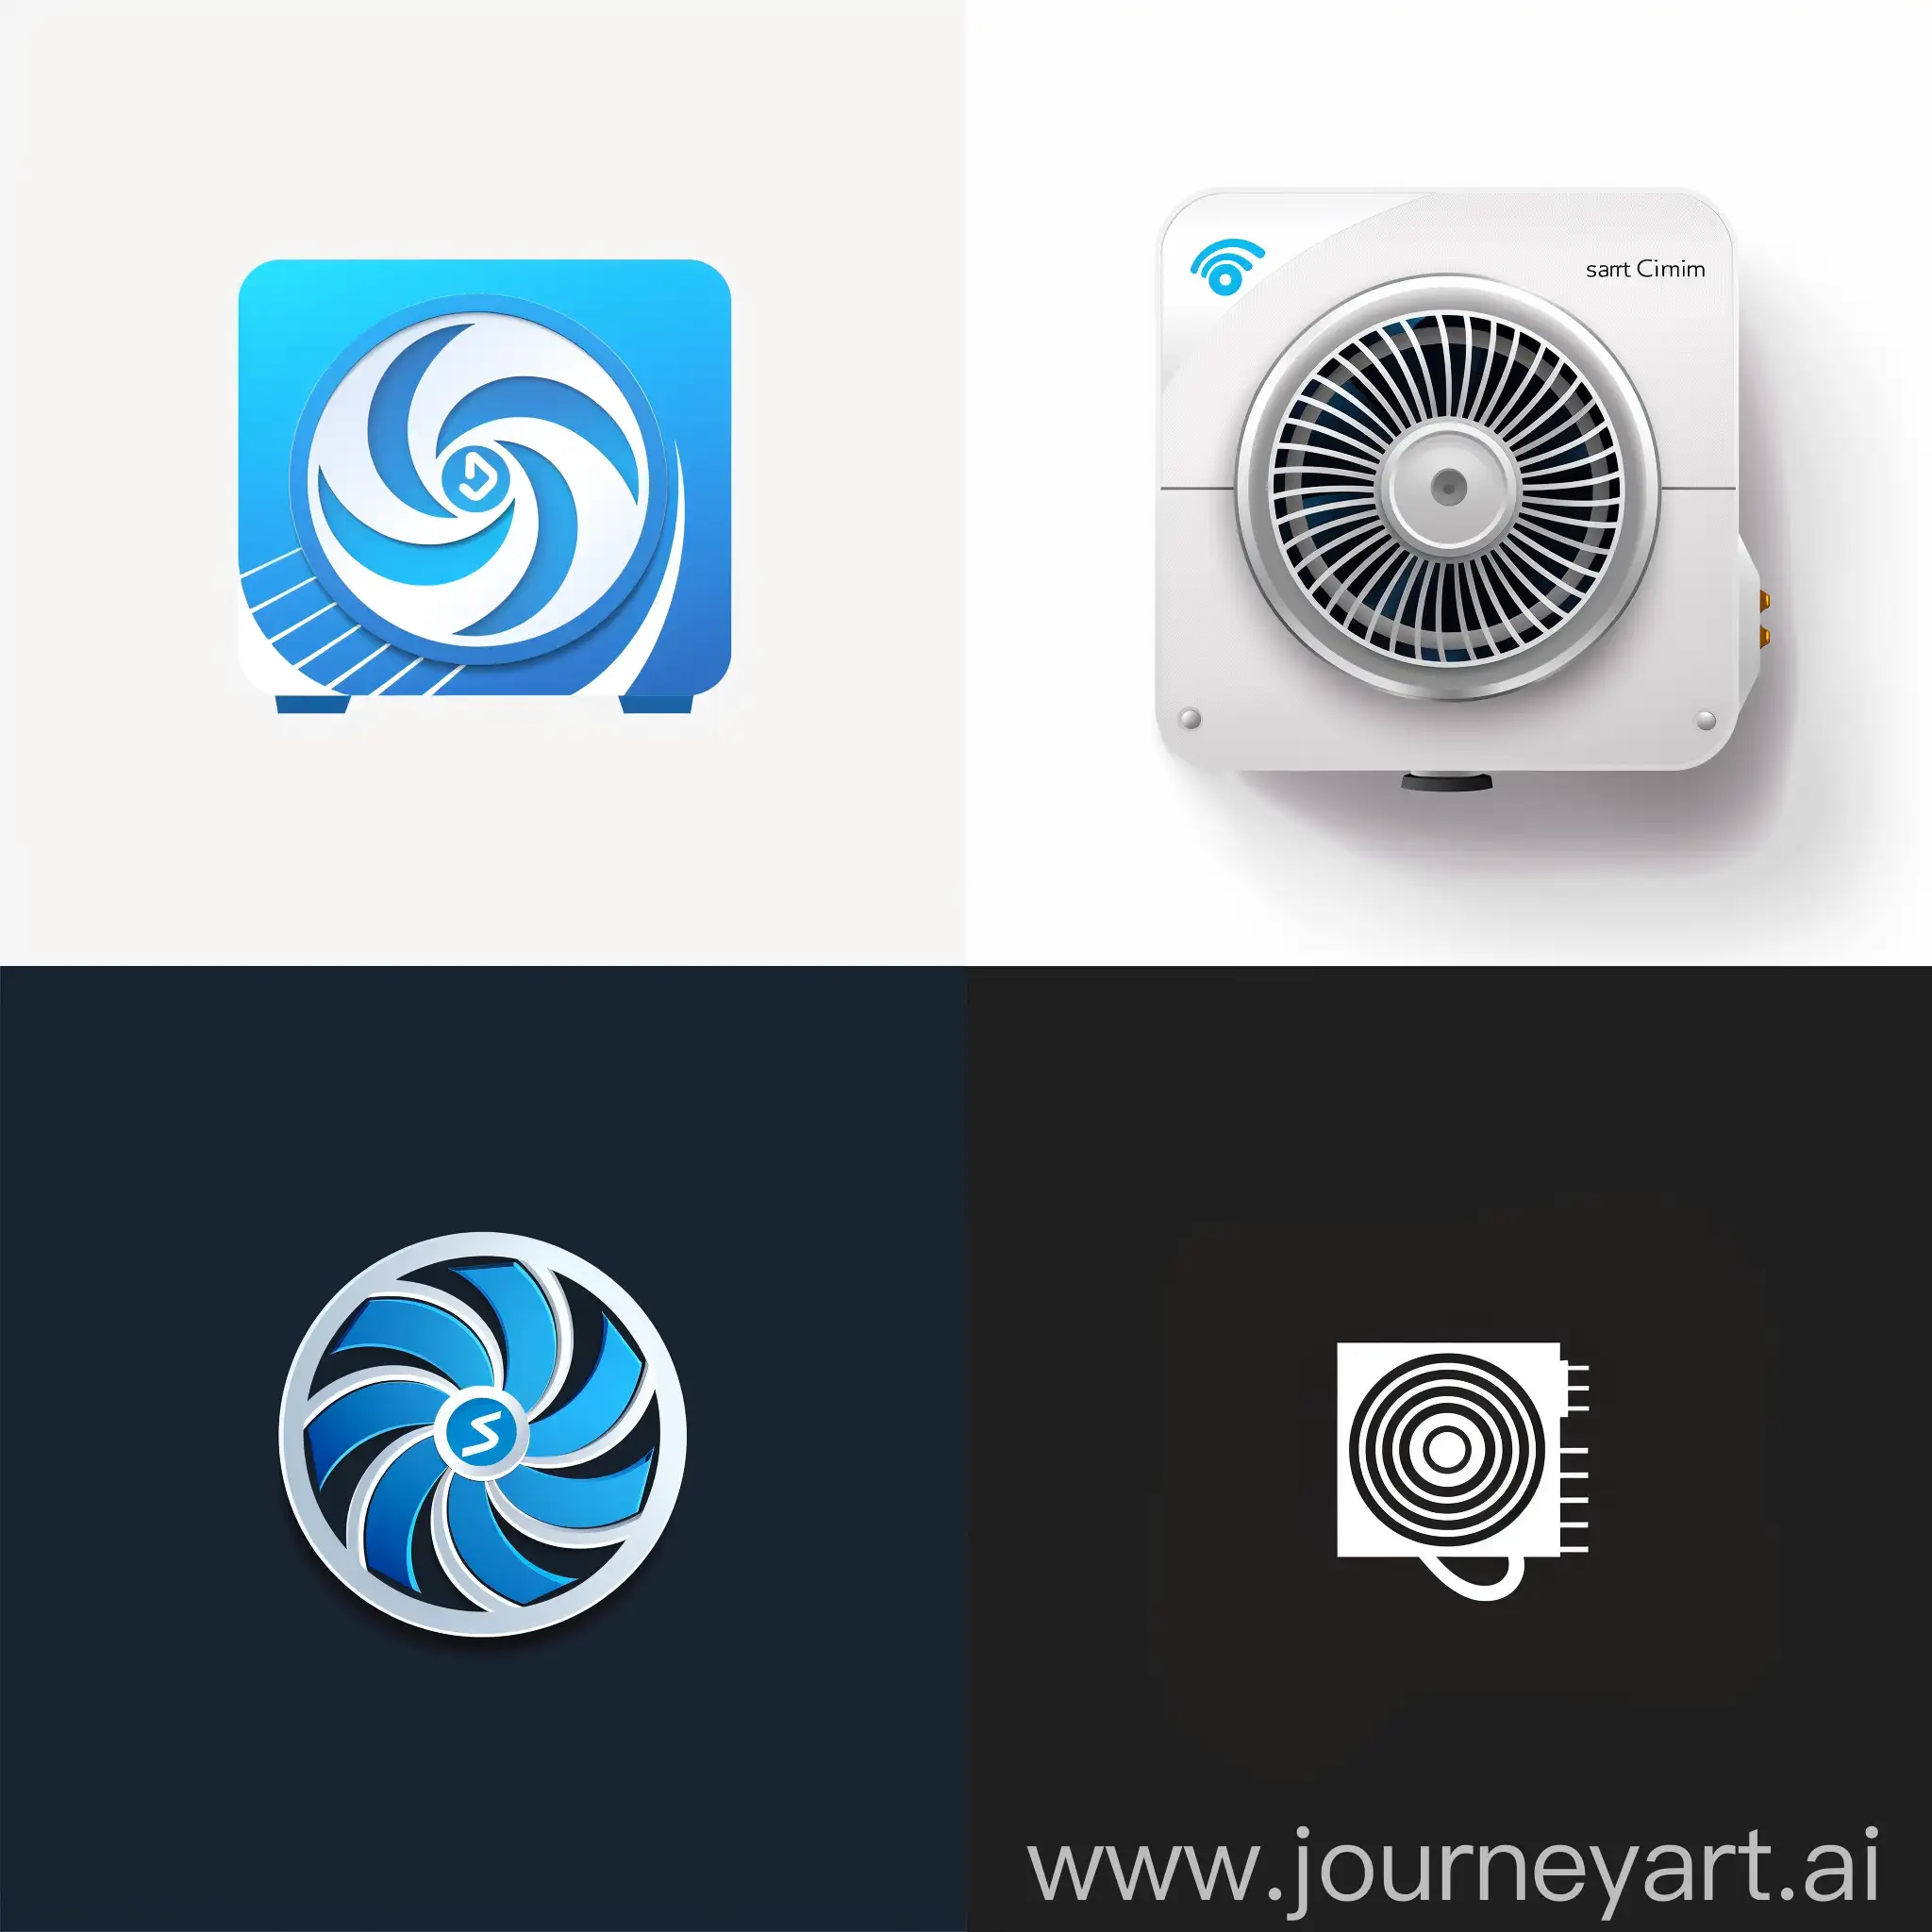 Minimalistic-Smart-Climate-Logo-with-Air-Conditioners-and-Fans